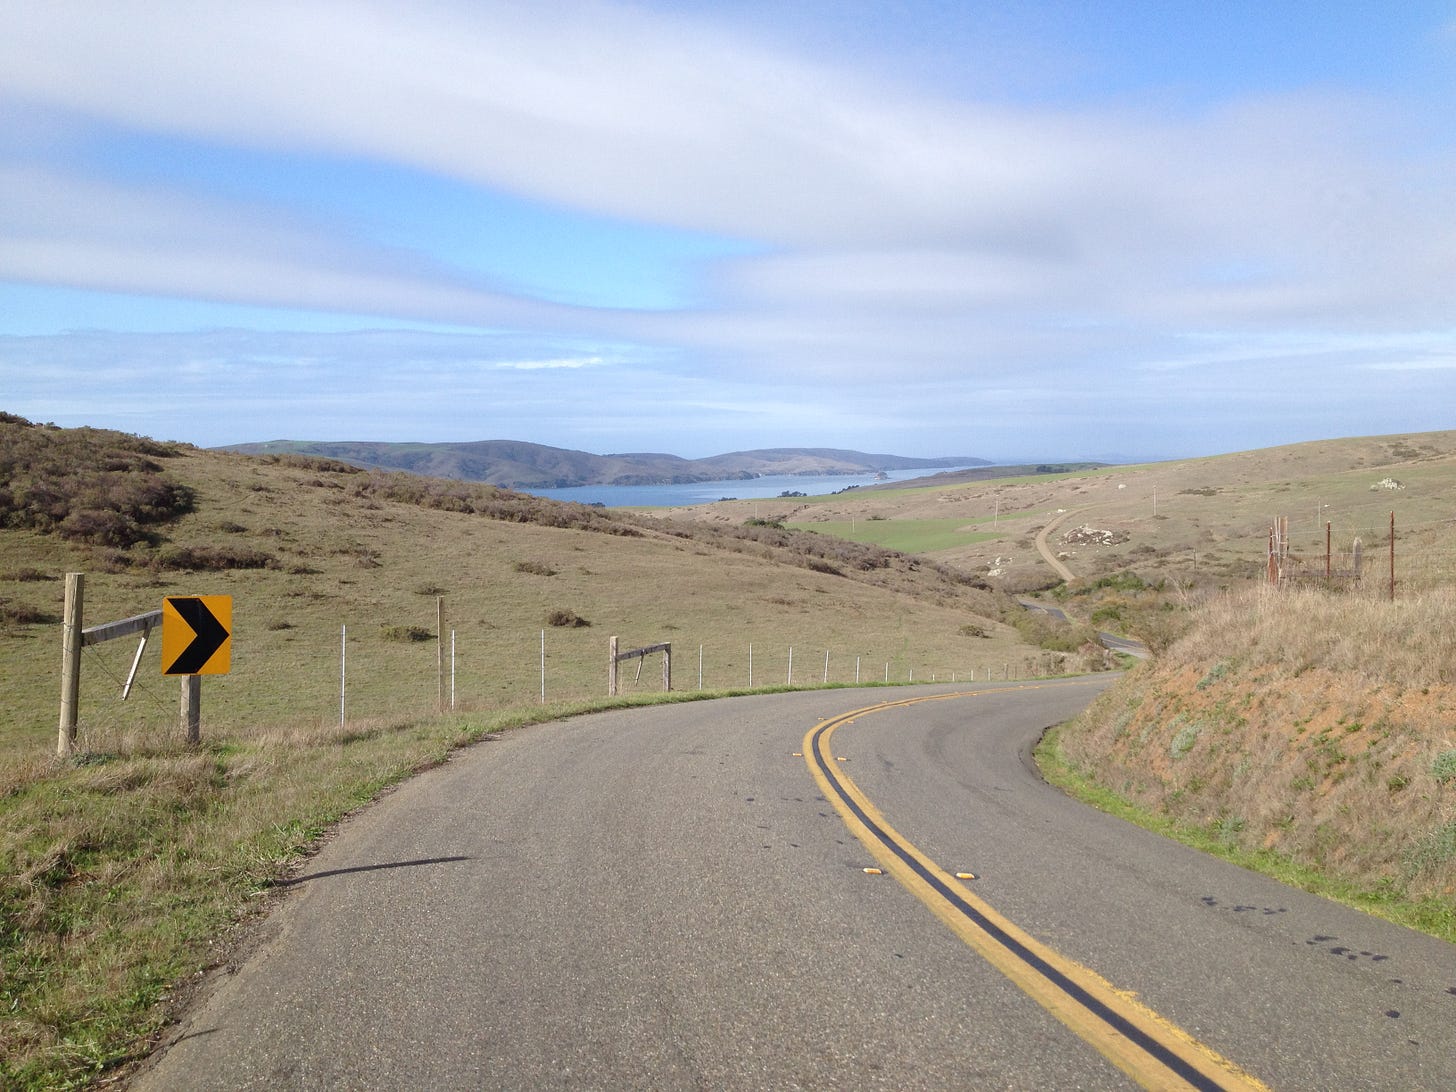 Photo of Tomales Bay viewed from the top of the Marshall wall climb. Photo by arod, 2014.